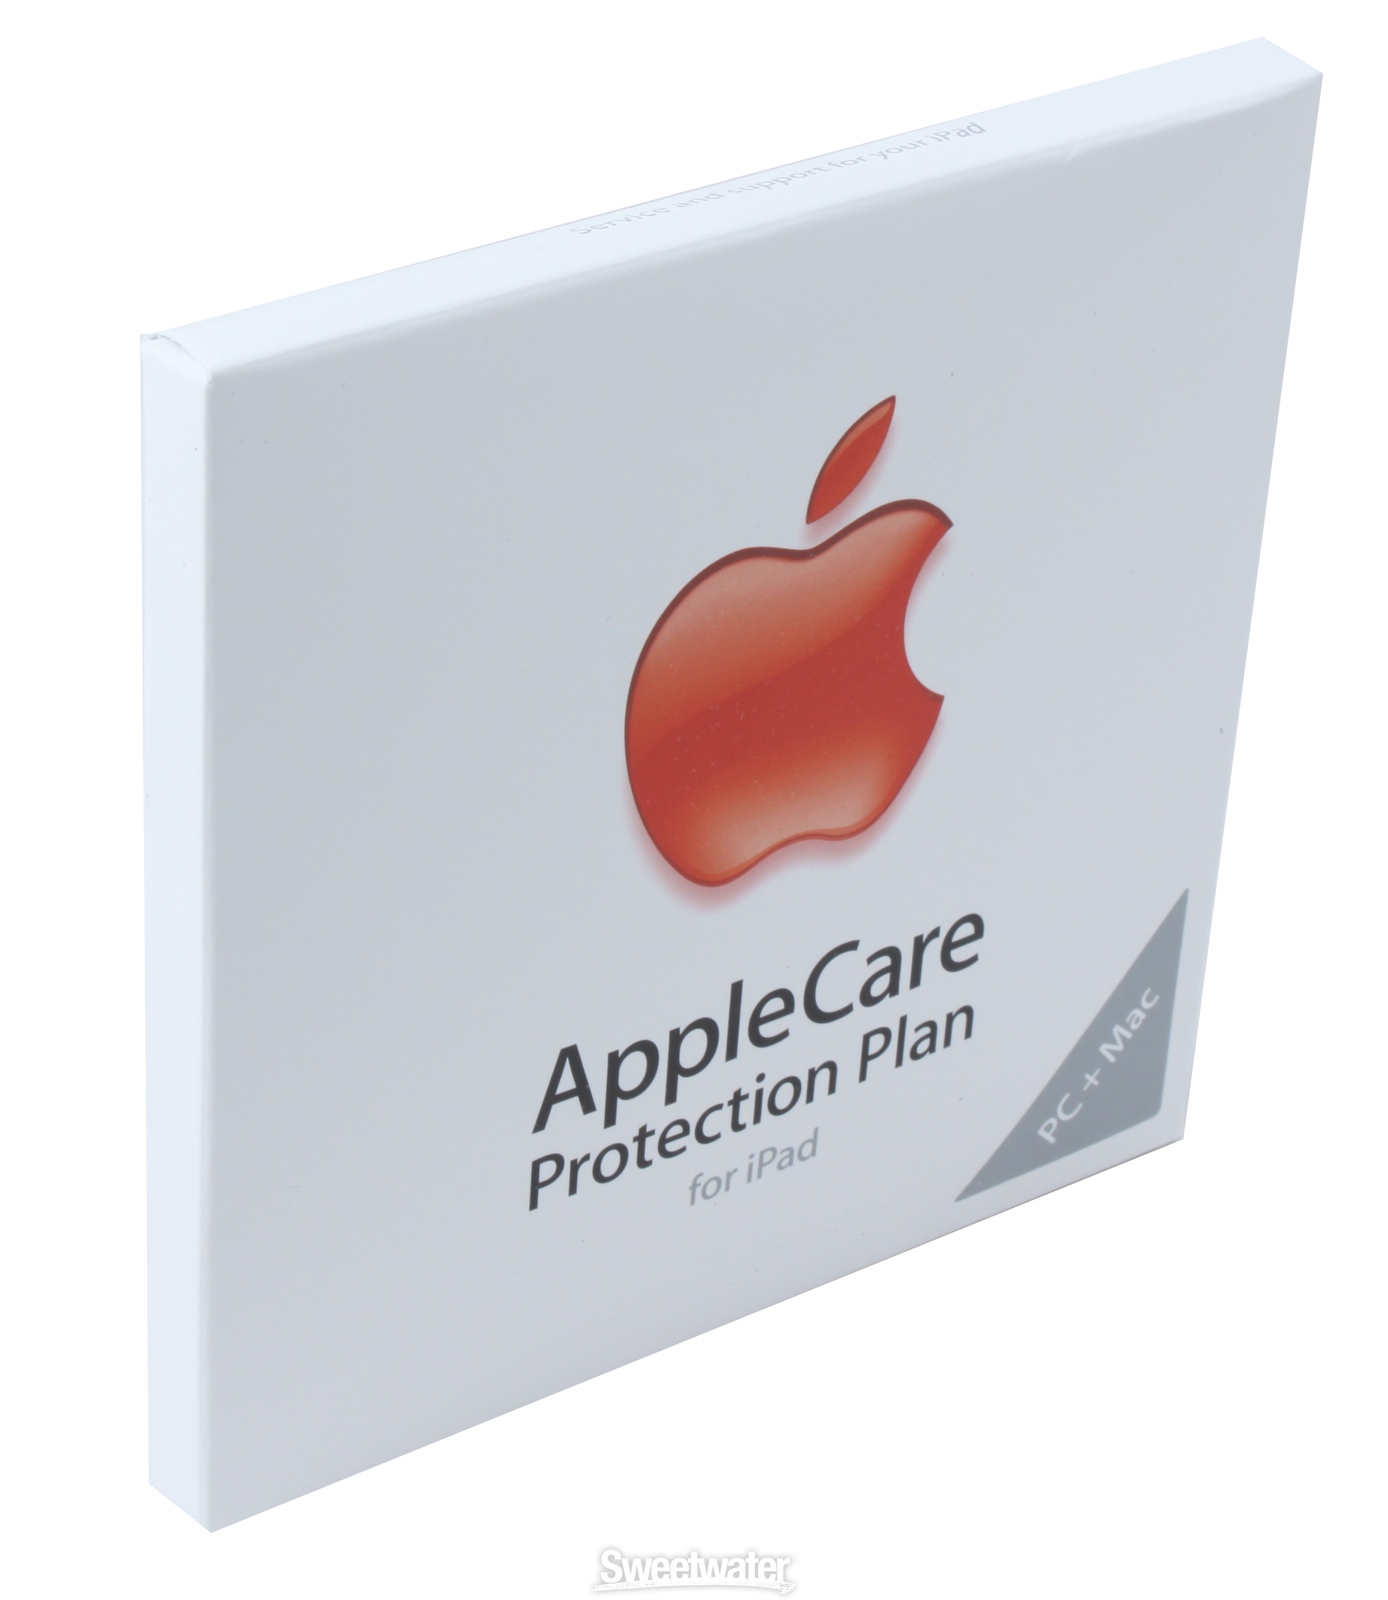 apple care protection plan for ipad